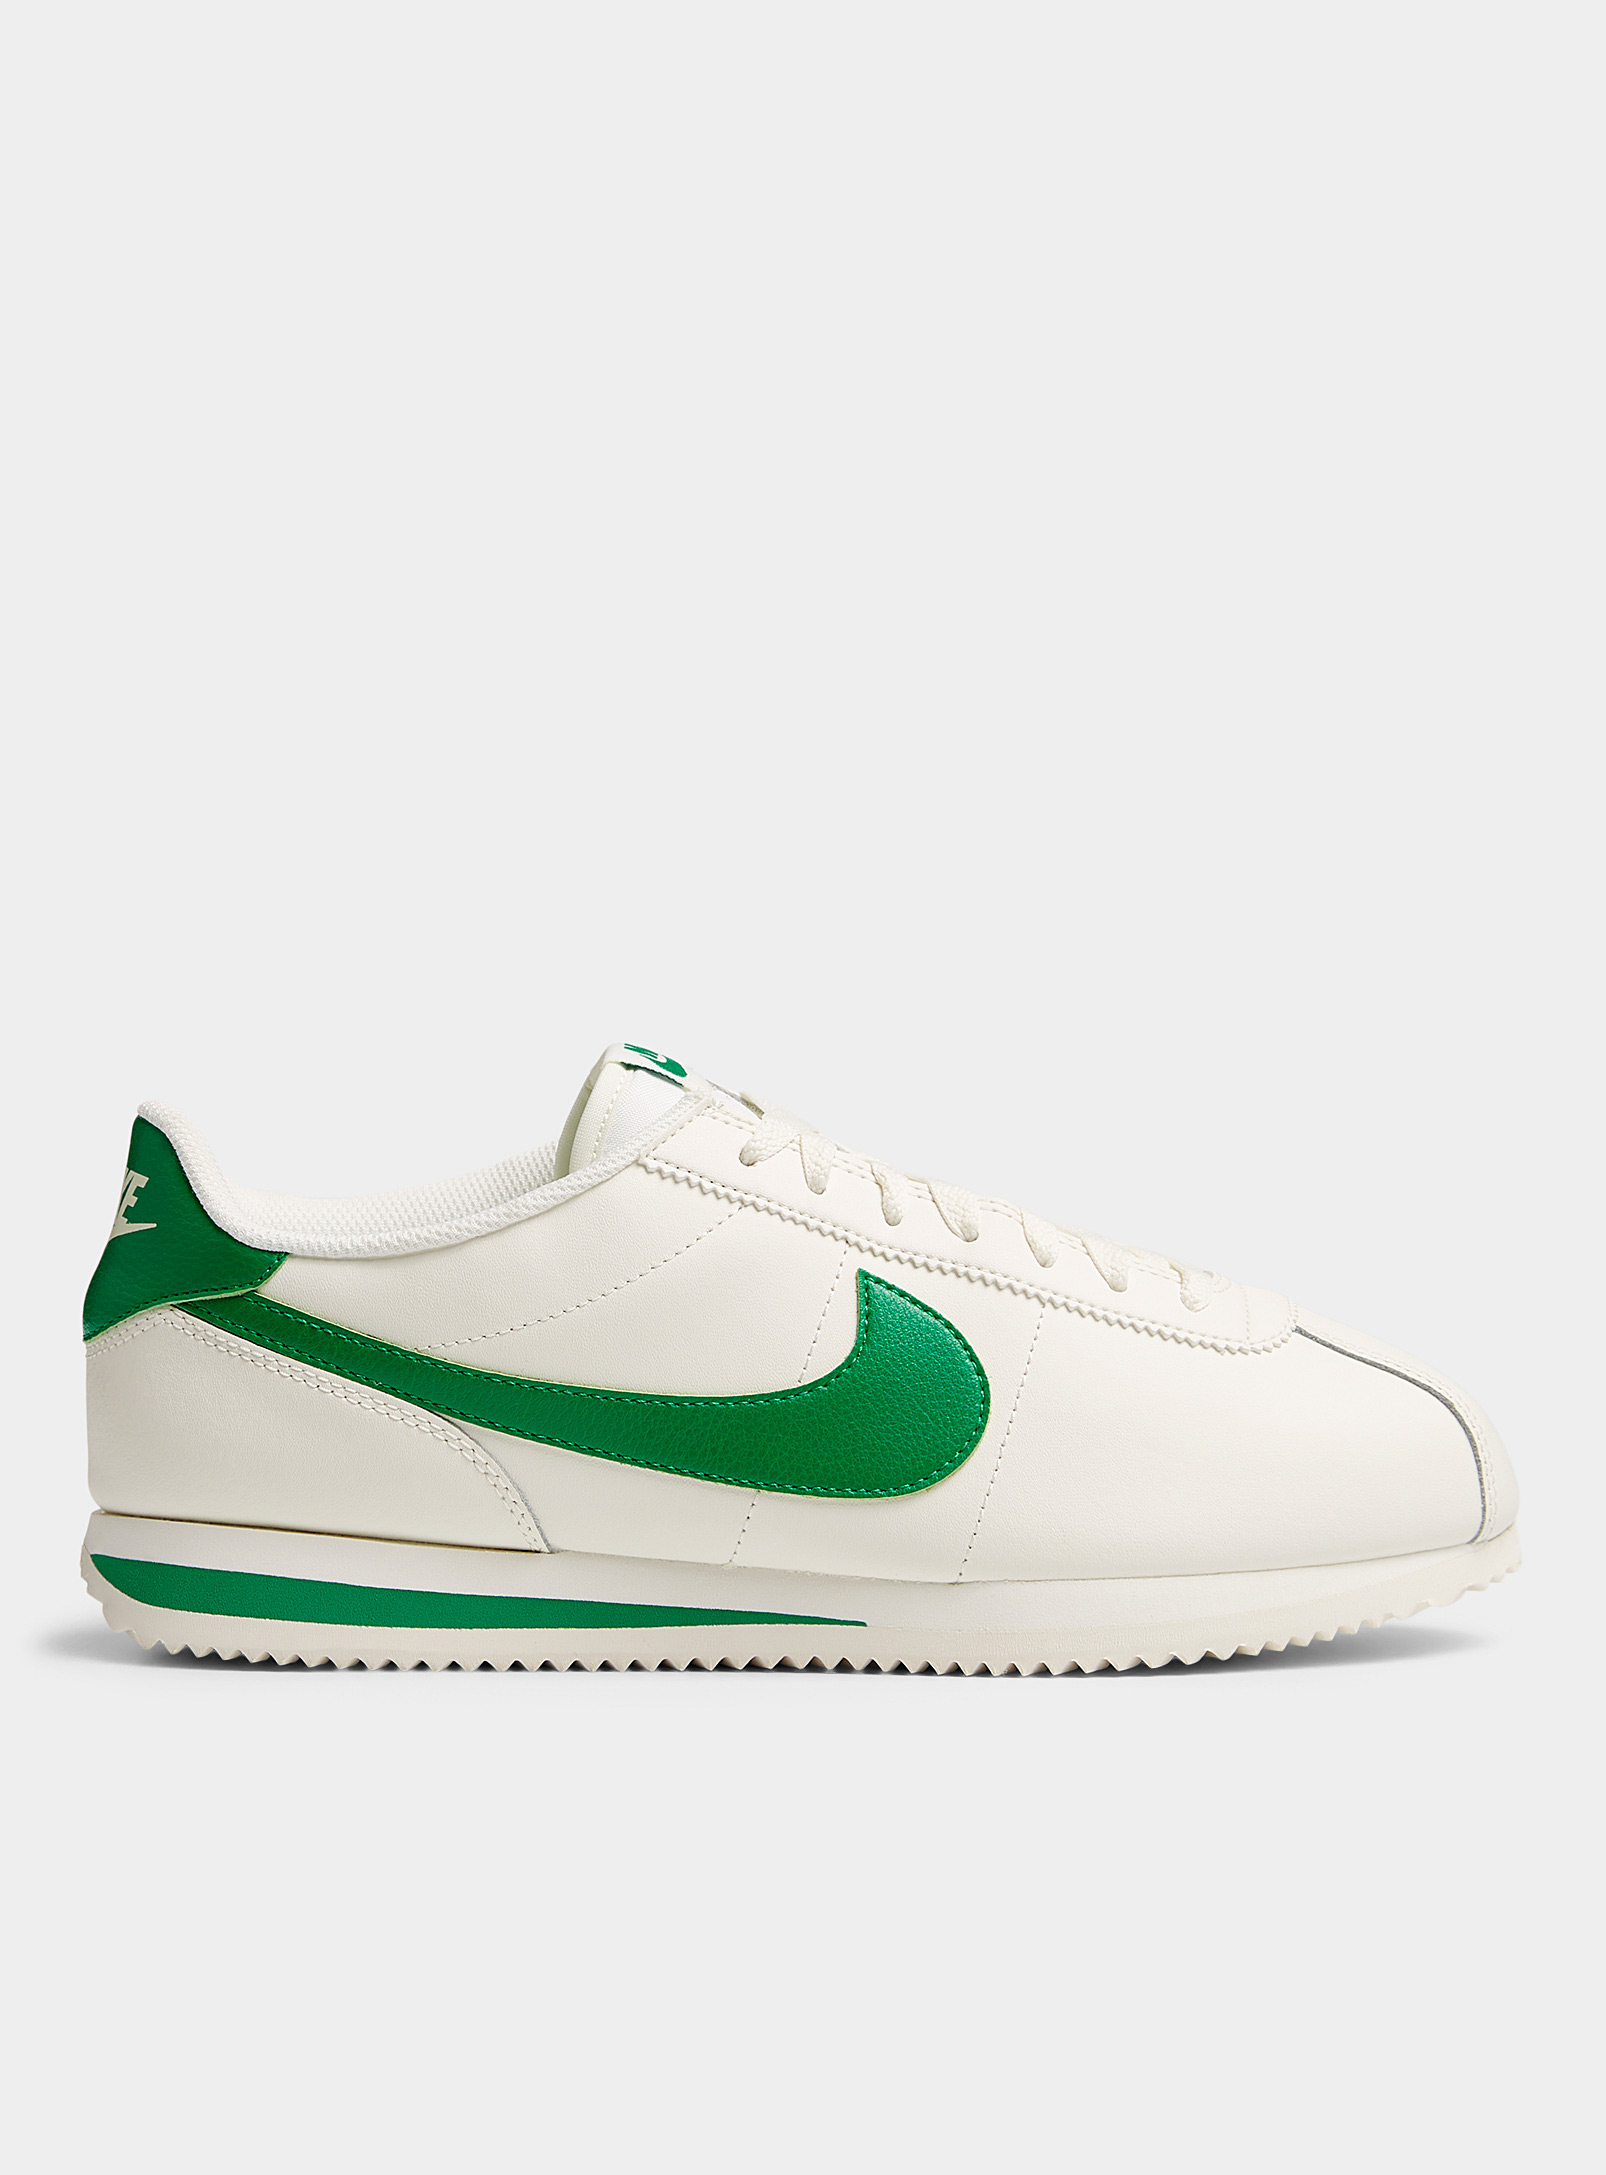 Shop Nike White-and-green Cortez Sneakers Men